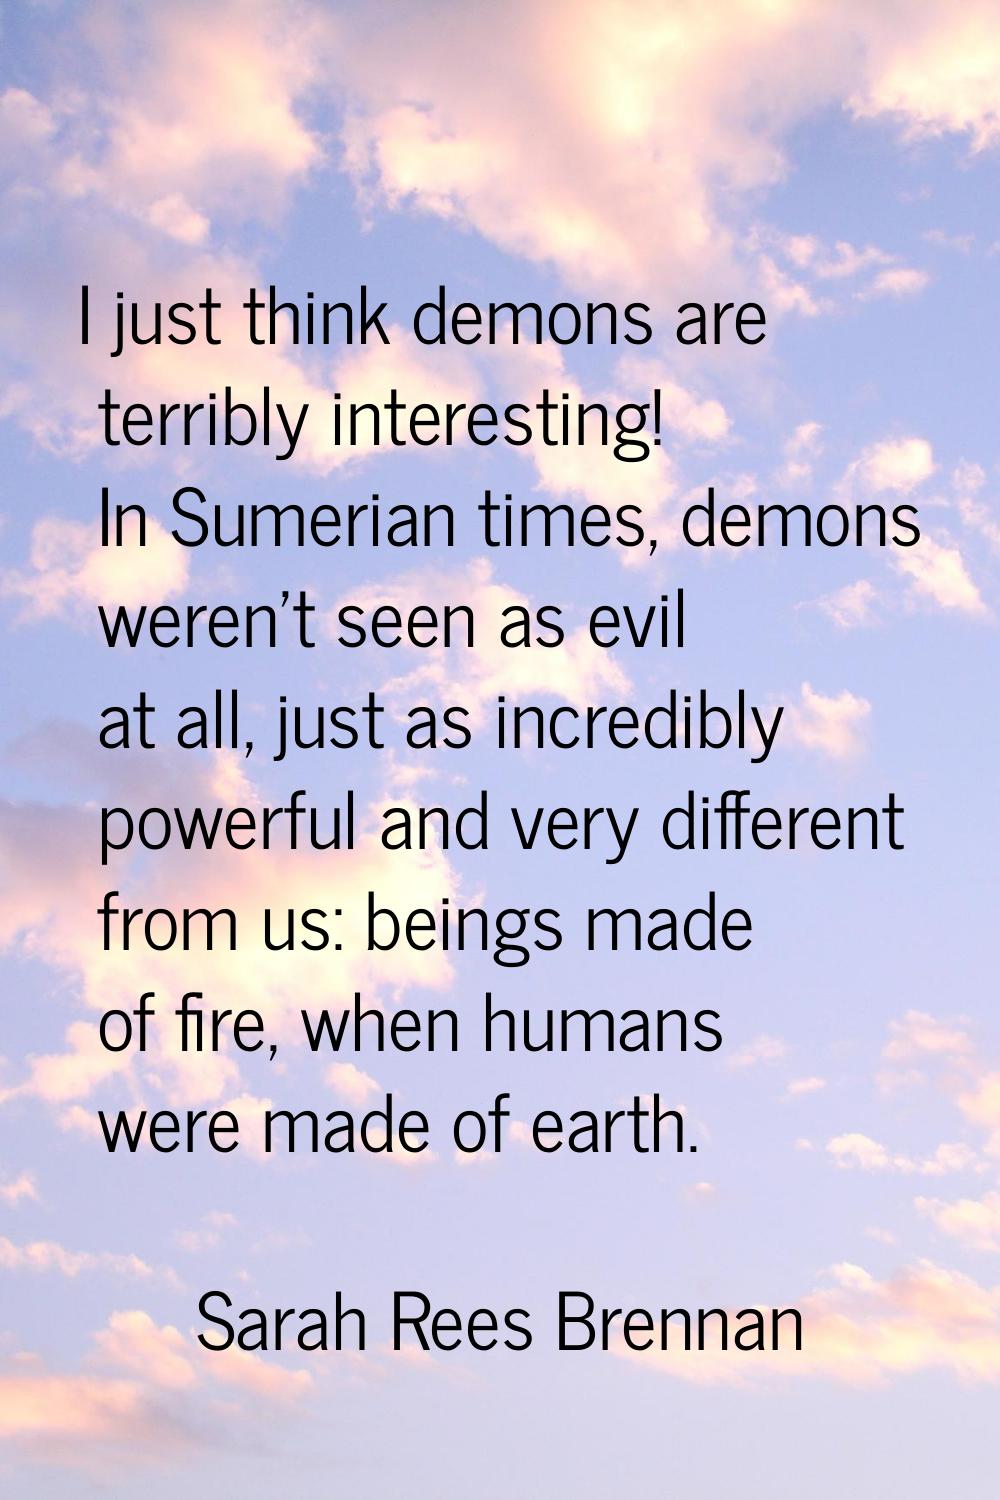 I just think demons are terribly interesting! In Sumerian times, demons weren't seen as evil at all